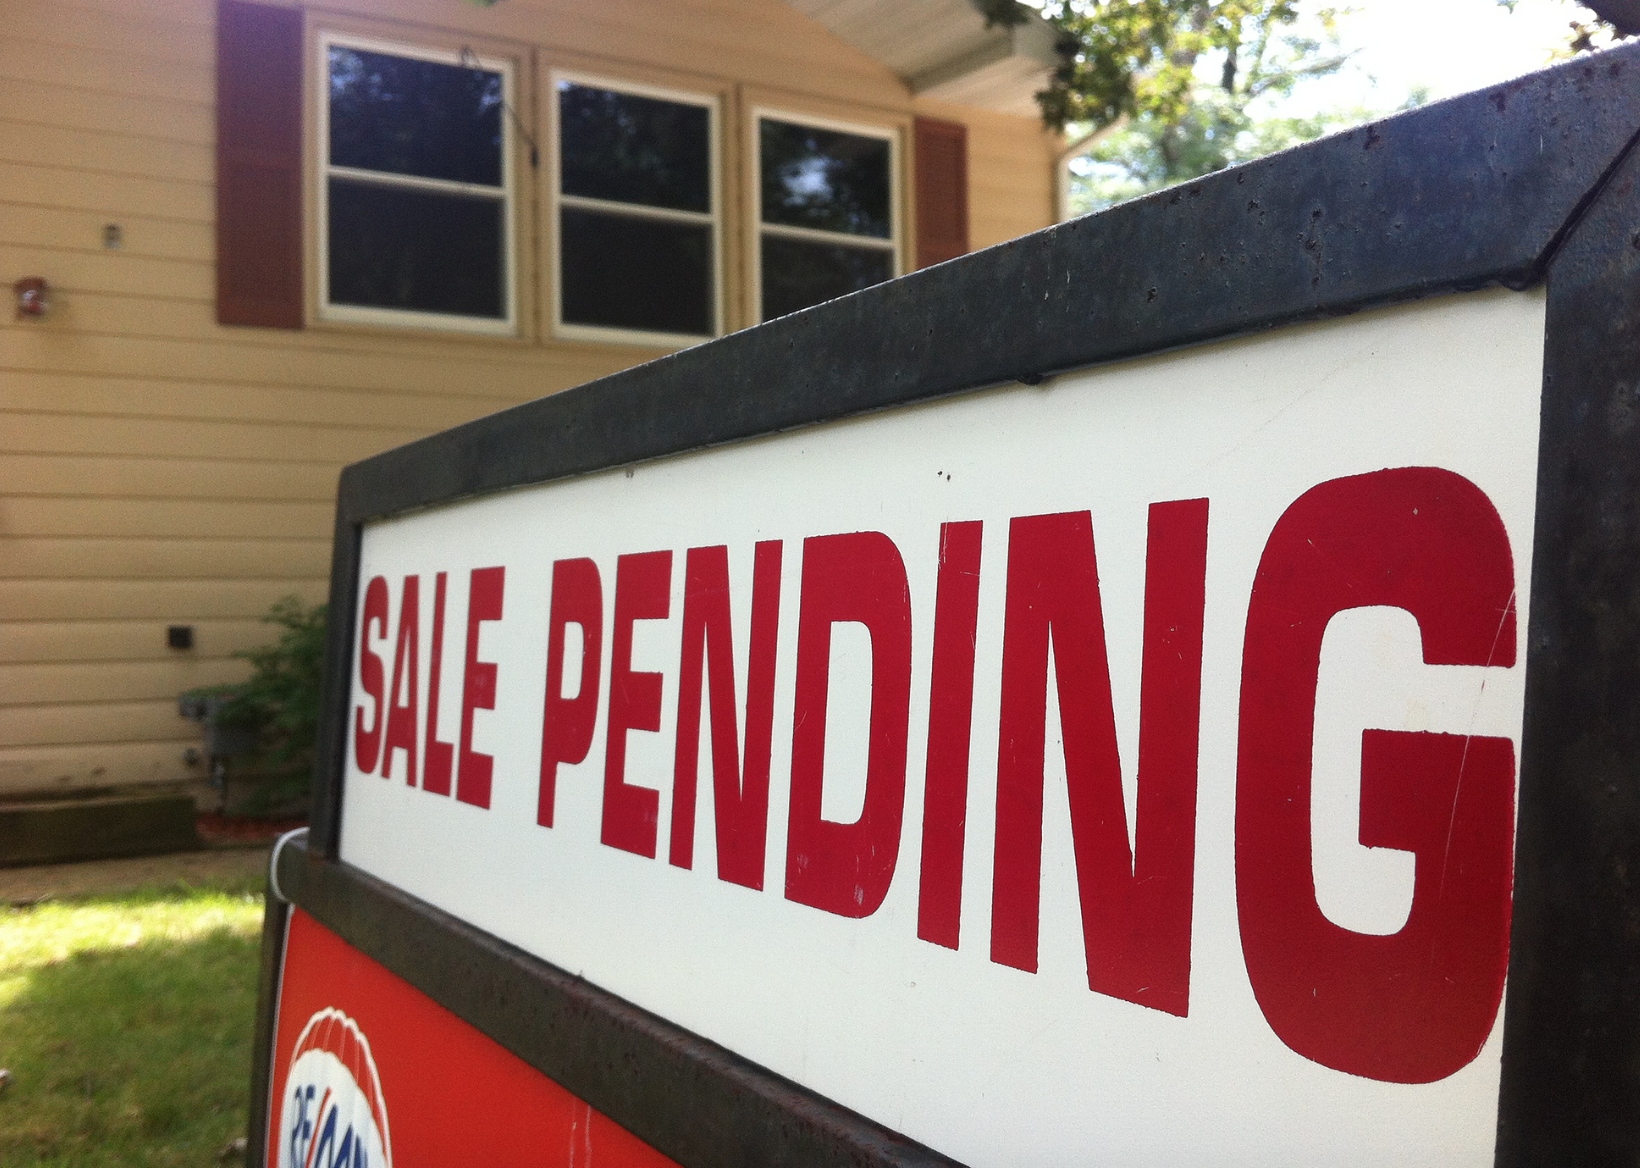 Sale Pending sign in front of home